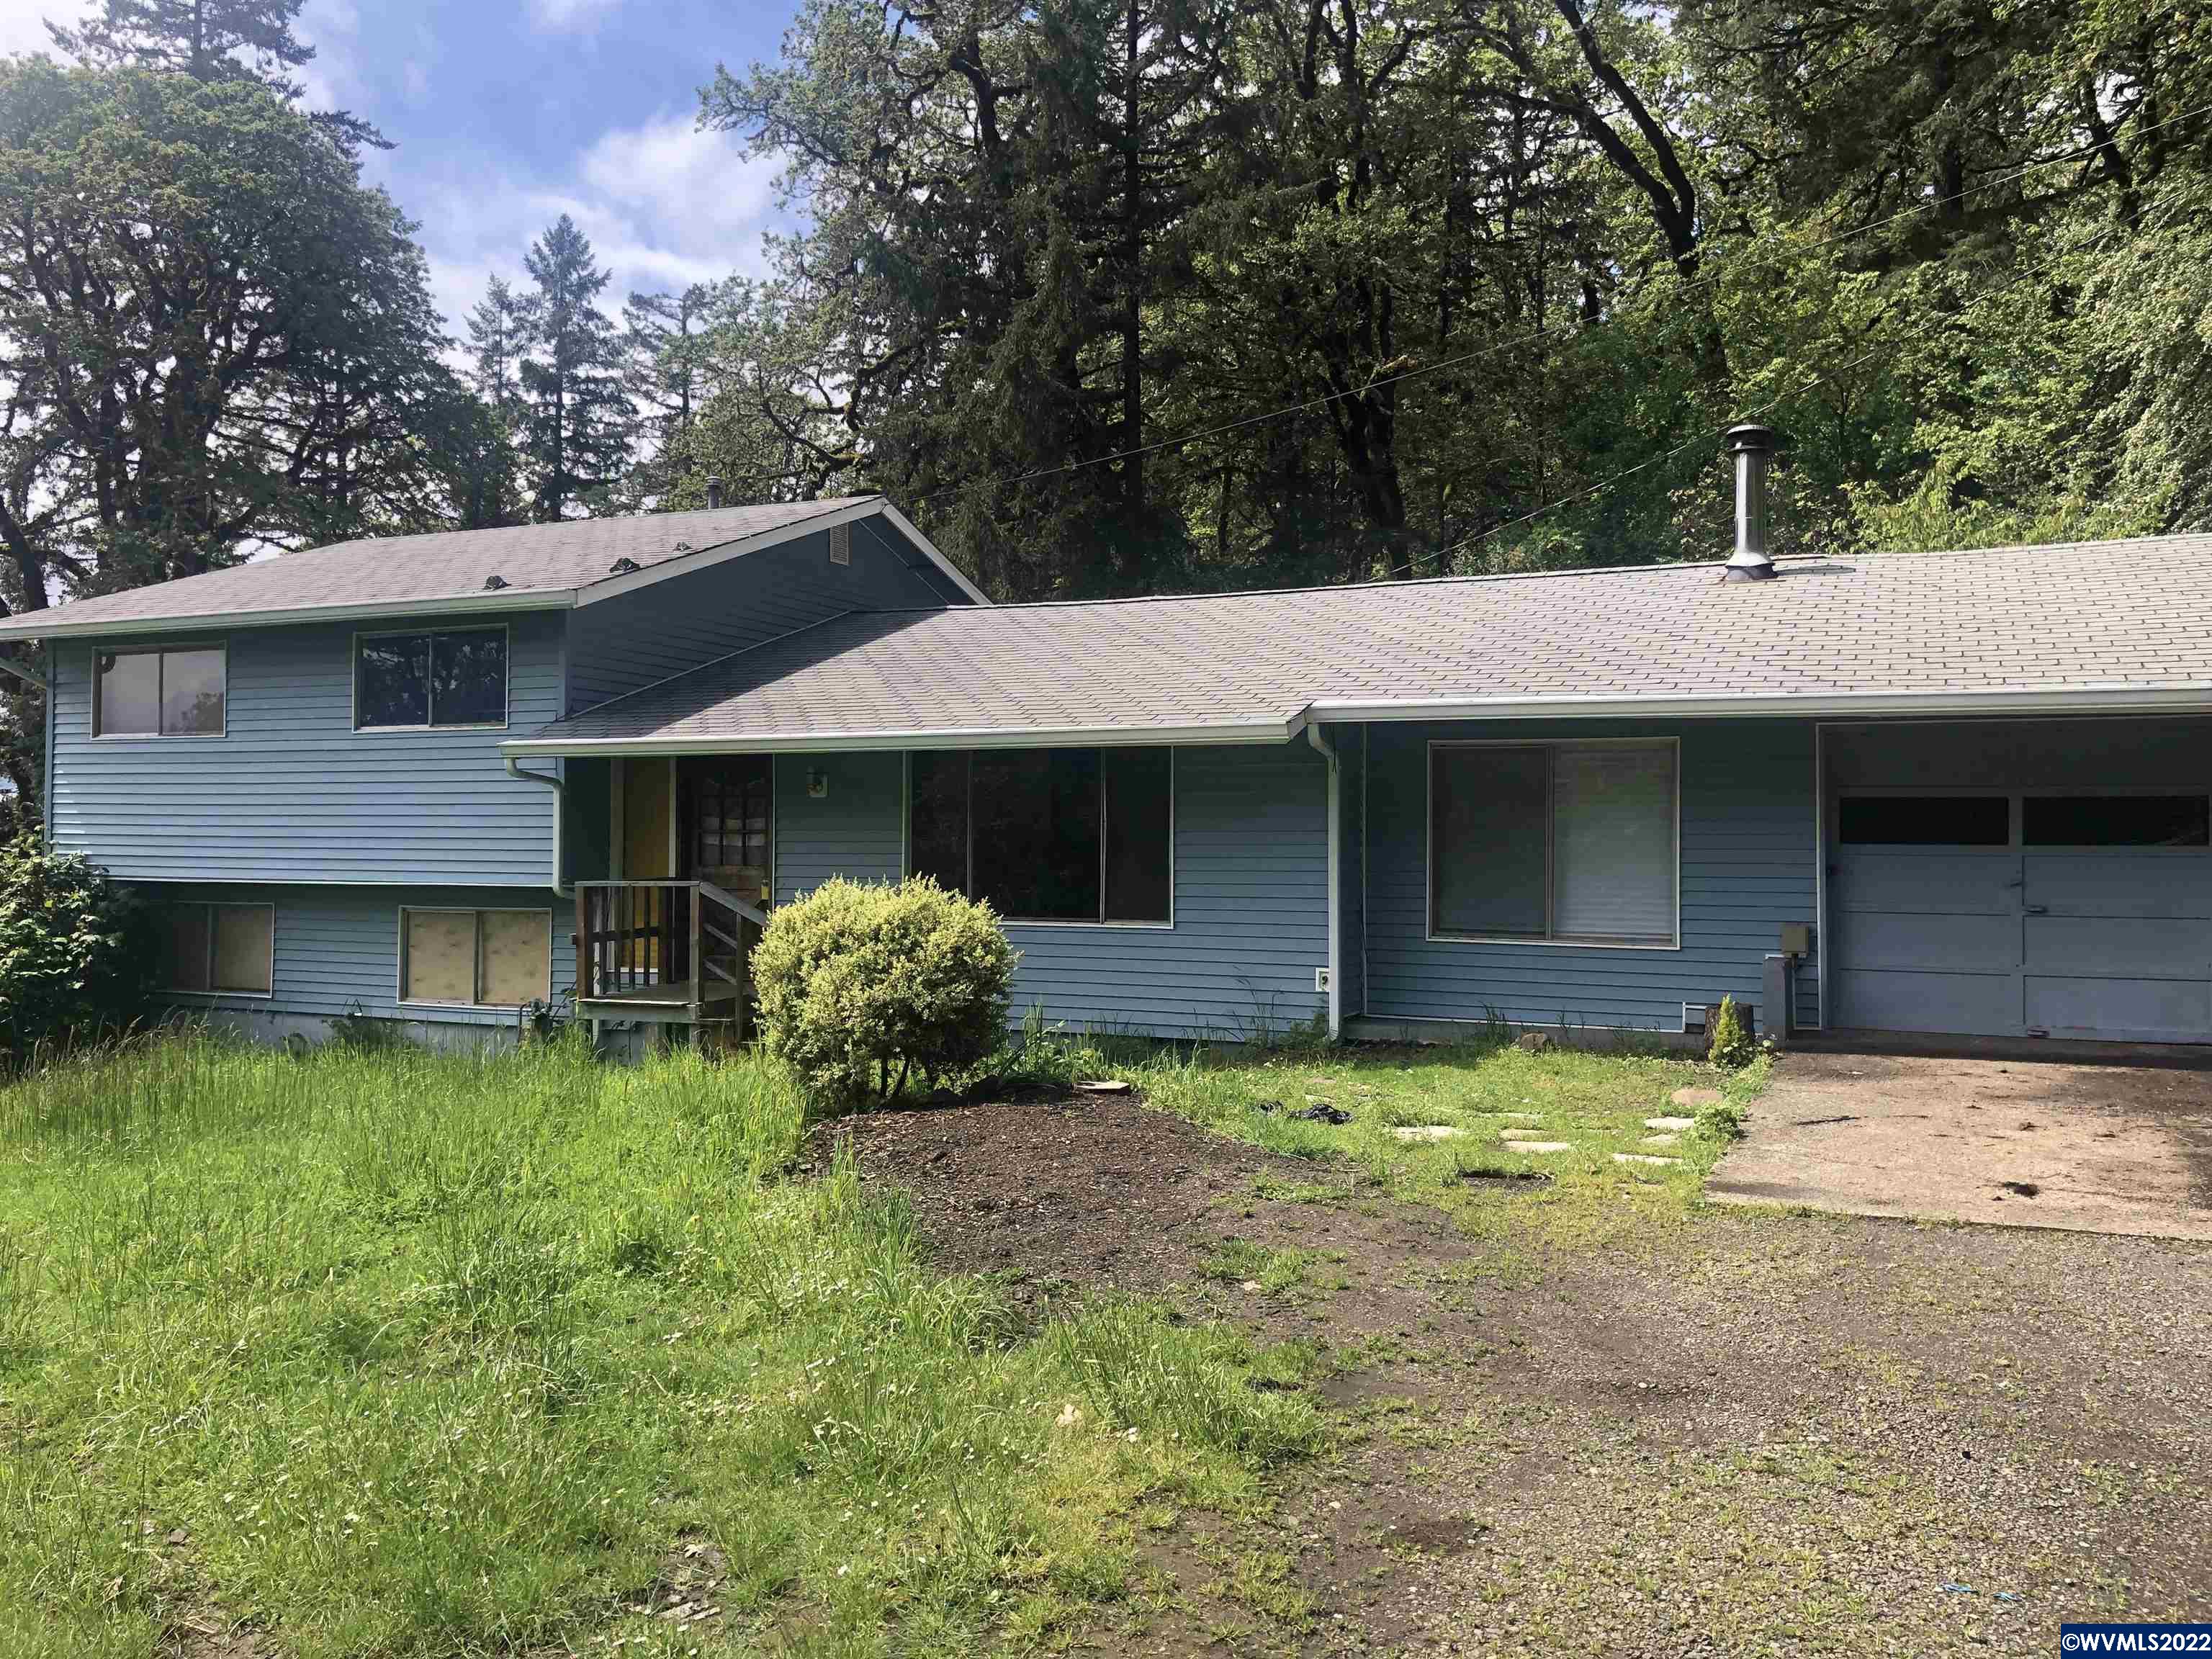 Hard to find small acreage property in North Corvallis. This one will need quite a bit of work but the location speaks for itself. Take a look and imagine the possibilities. Buyer to perform all due diligence in every aspect of the property.